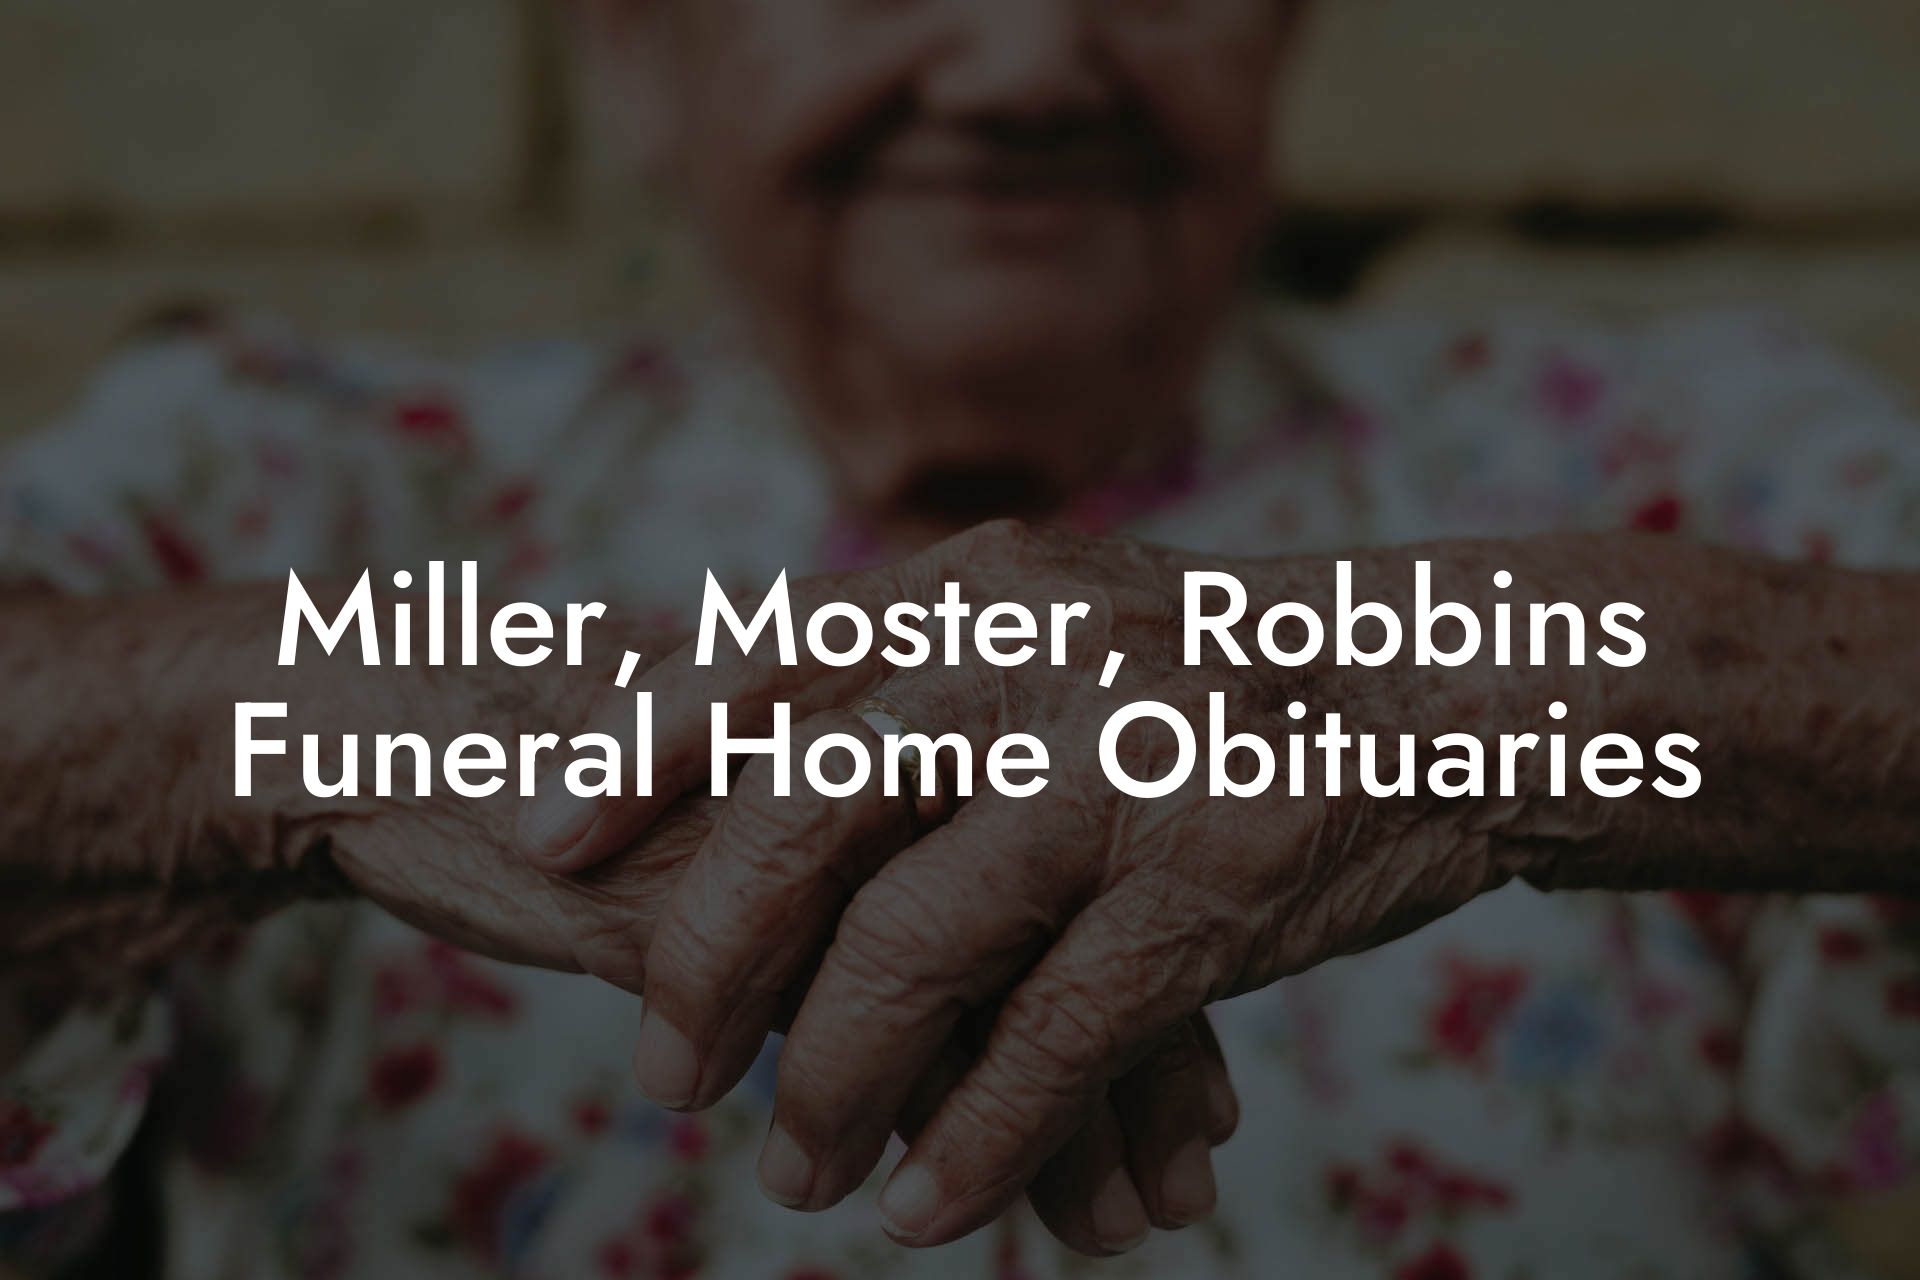 Miller, Moster, Robbins Funeral Home Obituaries